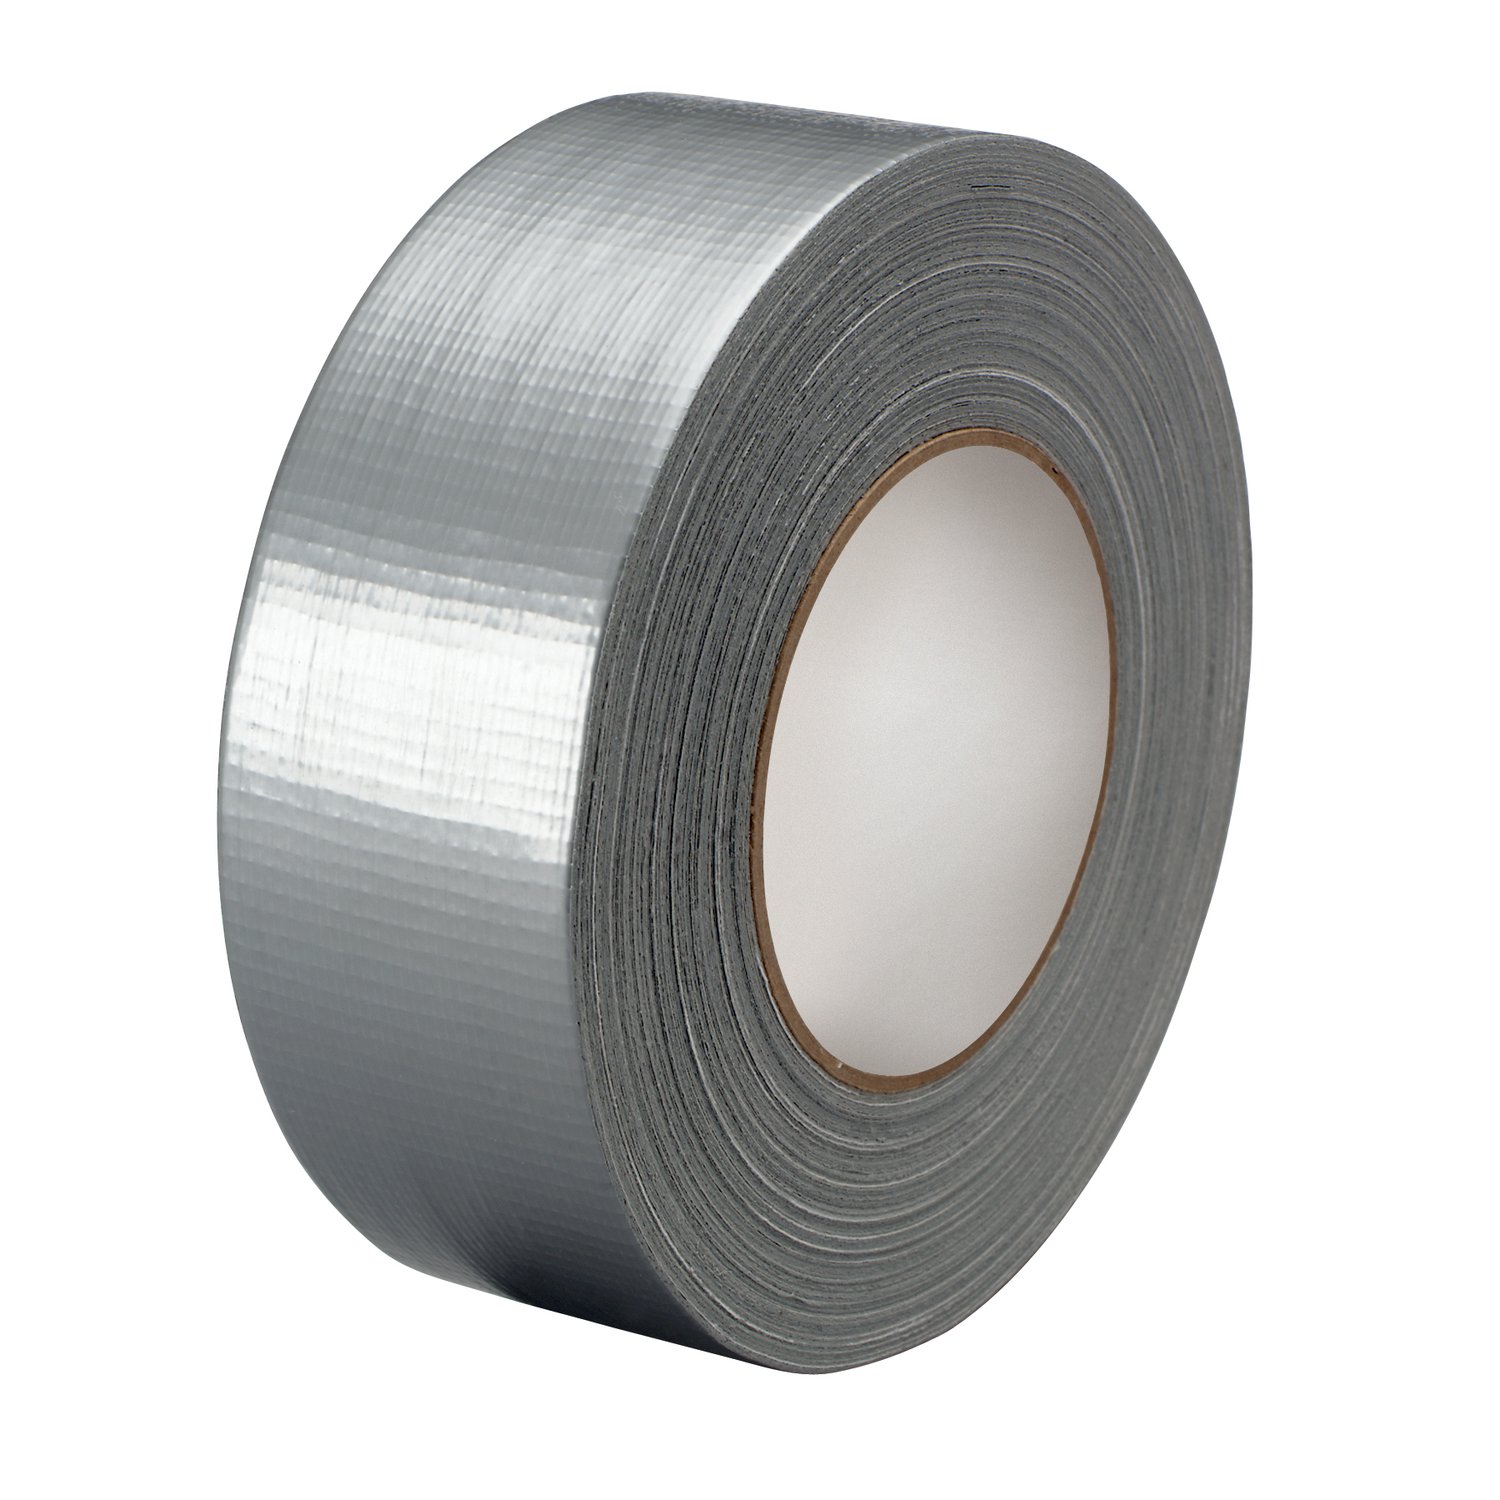 7100029108 - 3M Multi-Purpose Duct Tape 3900, Silver, 48 mm x 54.8 m, 7.6 mil, 24
Roll/Case, Individually Wrapped Conveniently Packaged